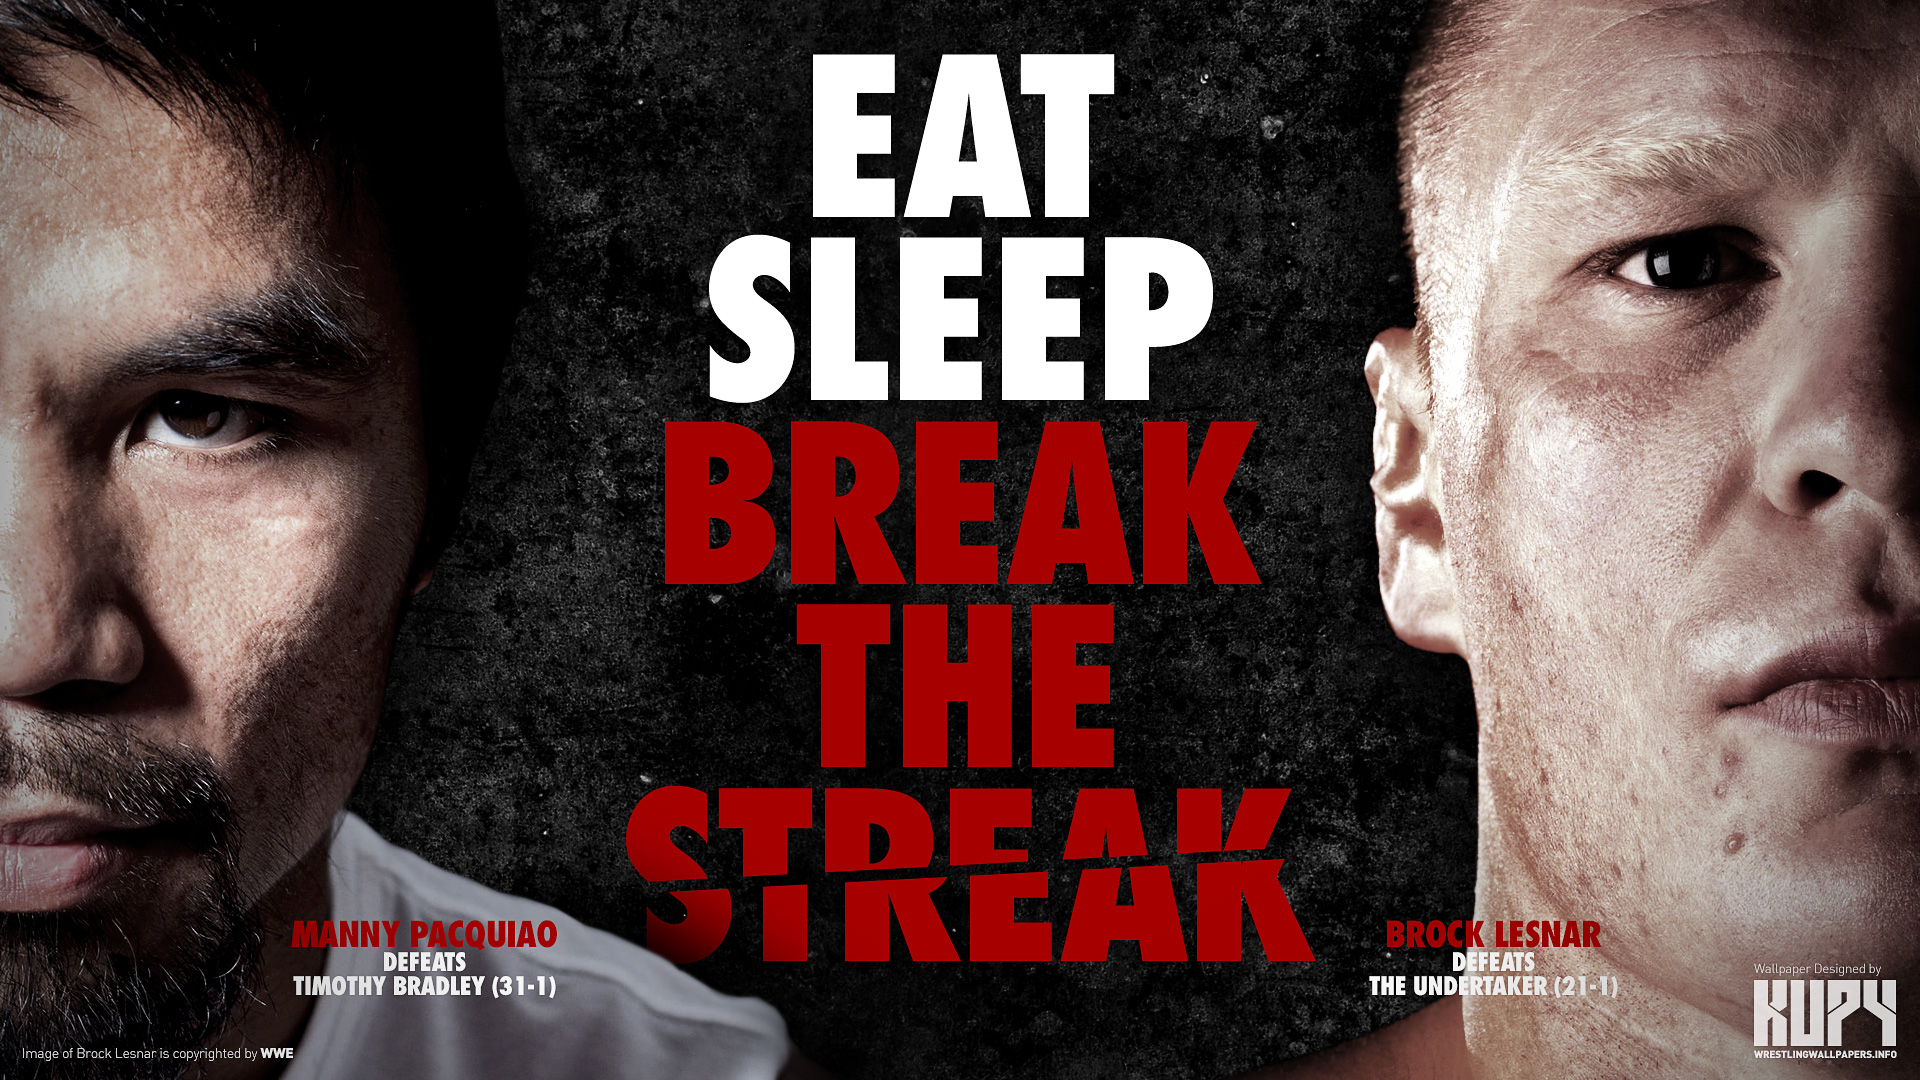 SPECIAL Eat Sleep Break The Streak wallpaper featuring Manny Pacquiao and  Brock Lesnar! - Kupy Wrestling Wallpapers